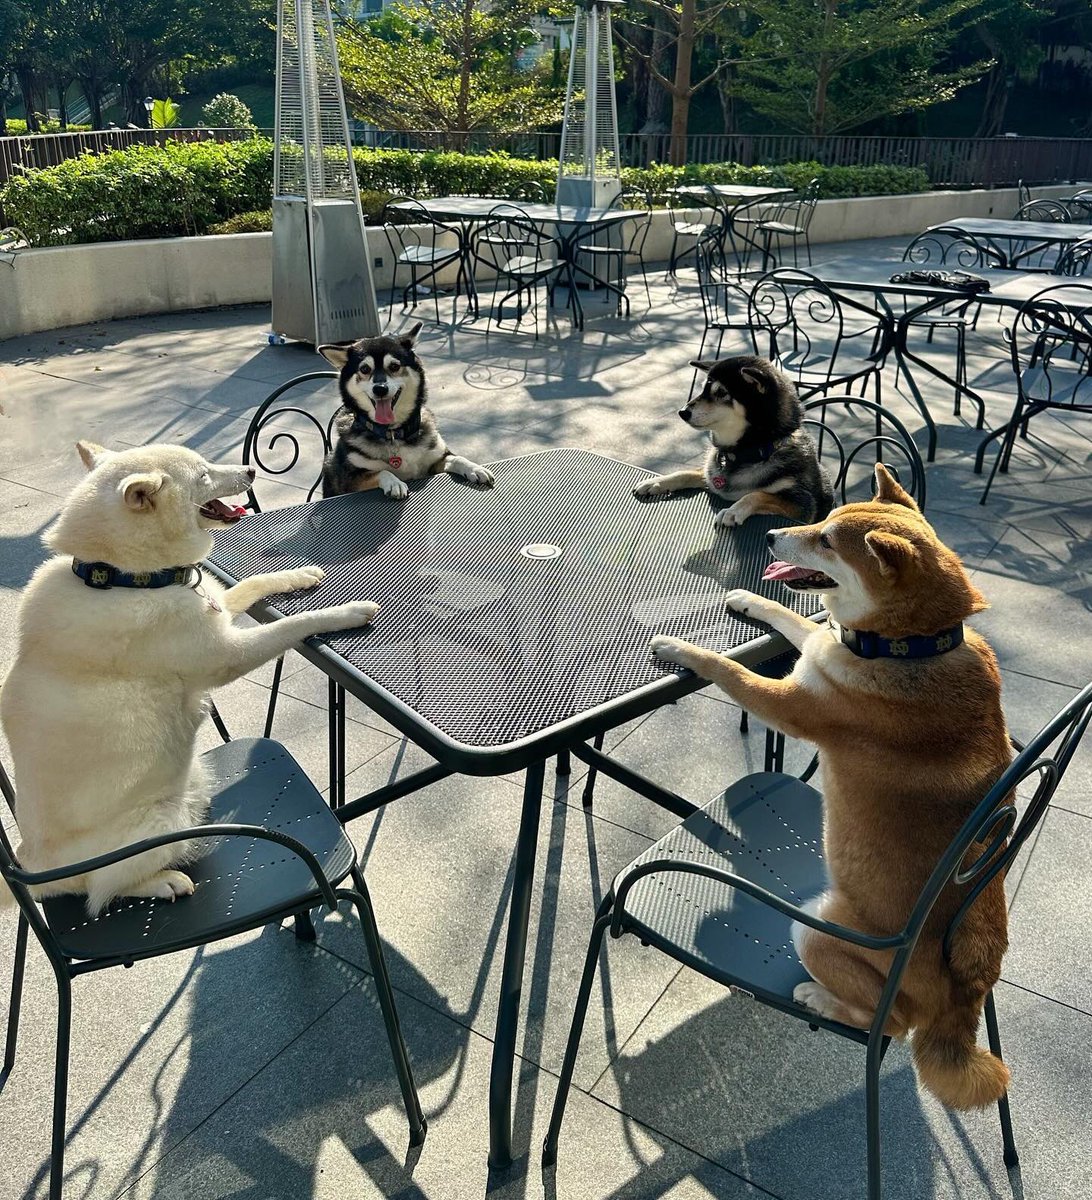 This is Kikko, Sasha, Momo, and Hina. They are holding a secret meeting to discuss their plans for world domination. Partly because Momo forgot to bring Scrabble again. 13/10 for all